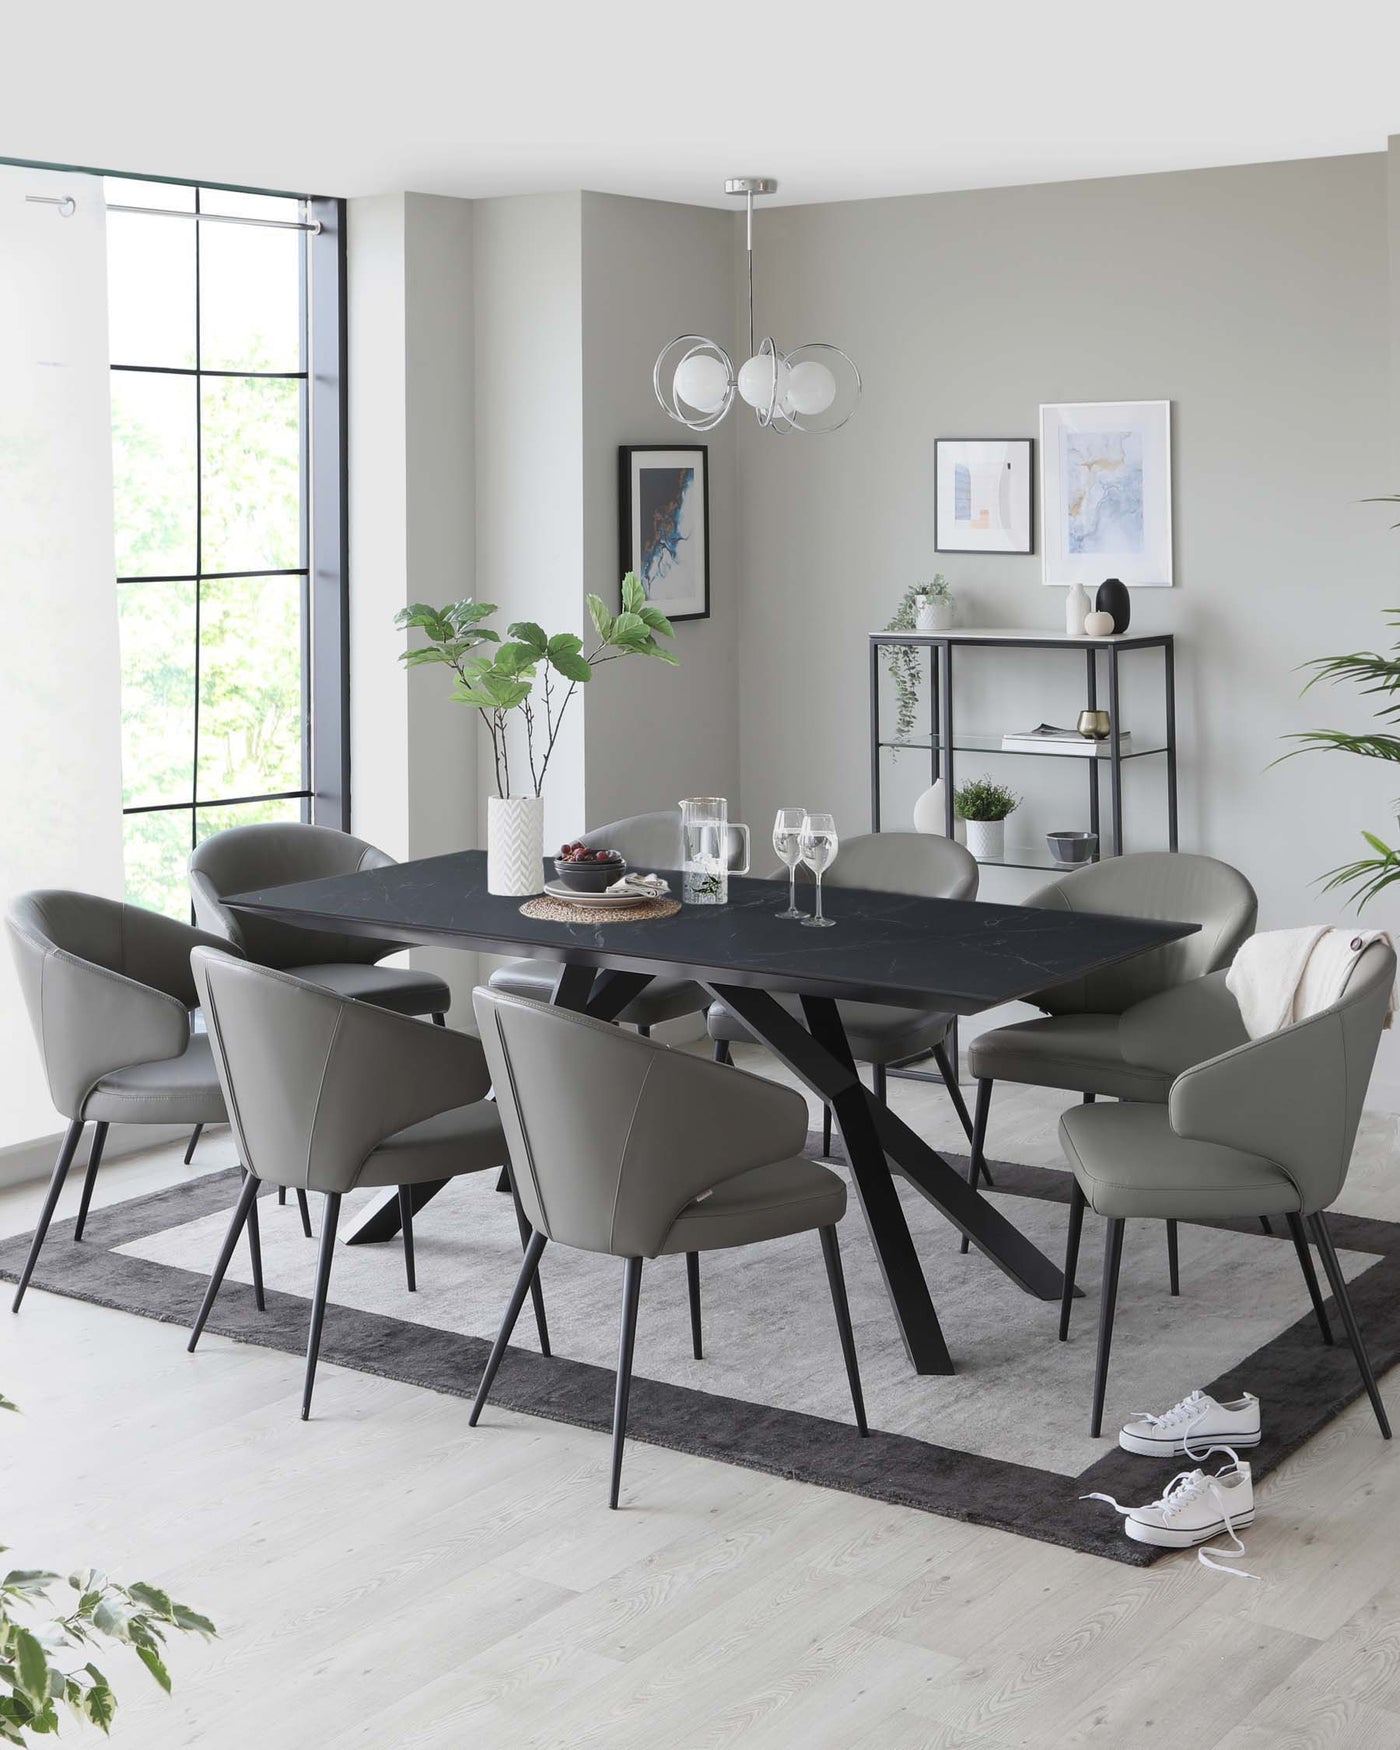 Contemporary dining room featuring an oval-shaped, dark wood table with a matte finish and angular black legs. Six matching upholstered chairs with a sleek design in a muted grey tone, complete with slender black metal legs, are positioned around the table. A minimalist black metal shelving unit displaying decorative objects provides a functional backdrop. The clean lines and neutral colour palette create a modern yet inviting atmosphere.